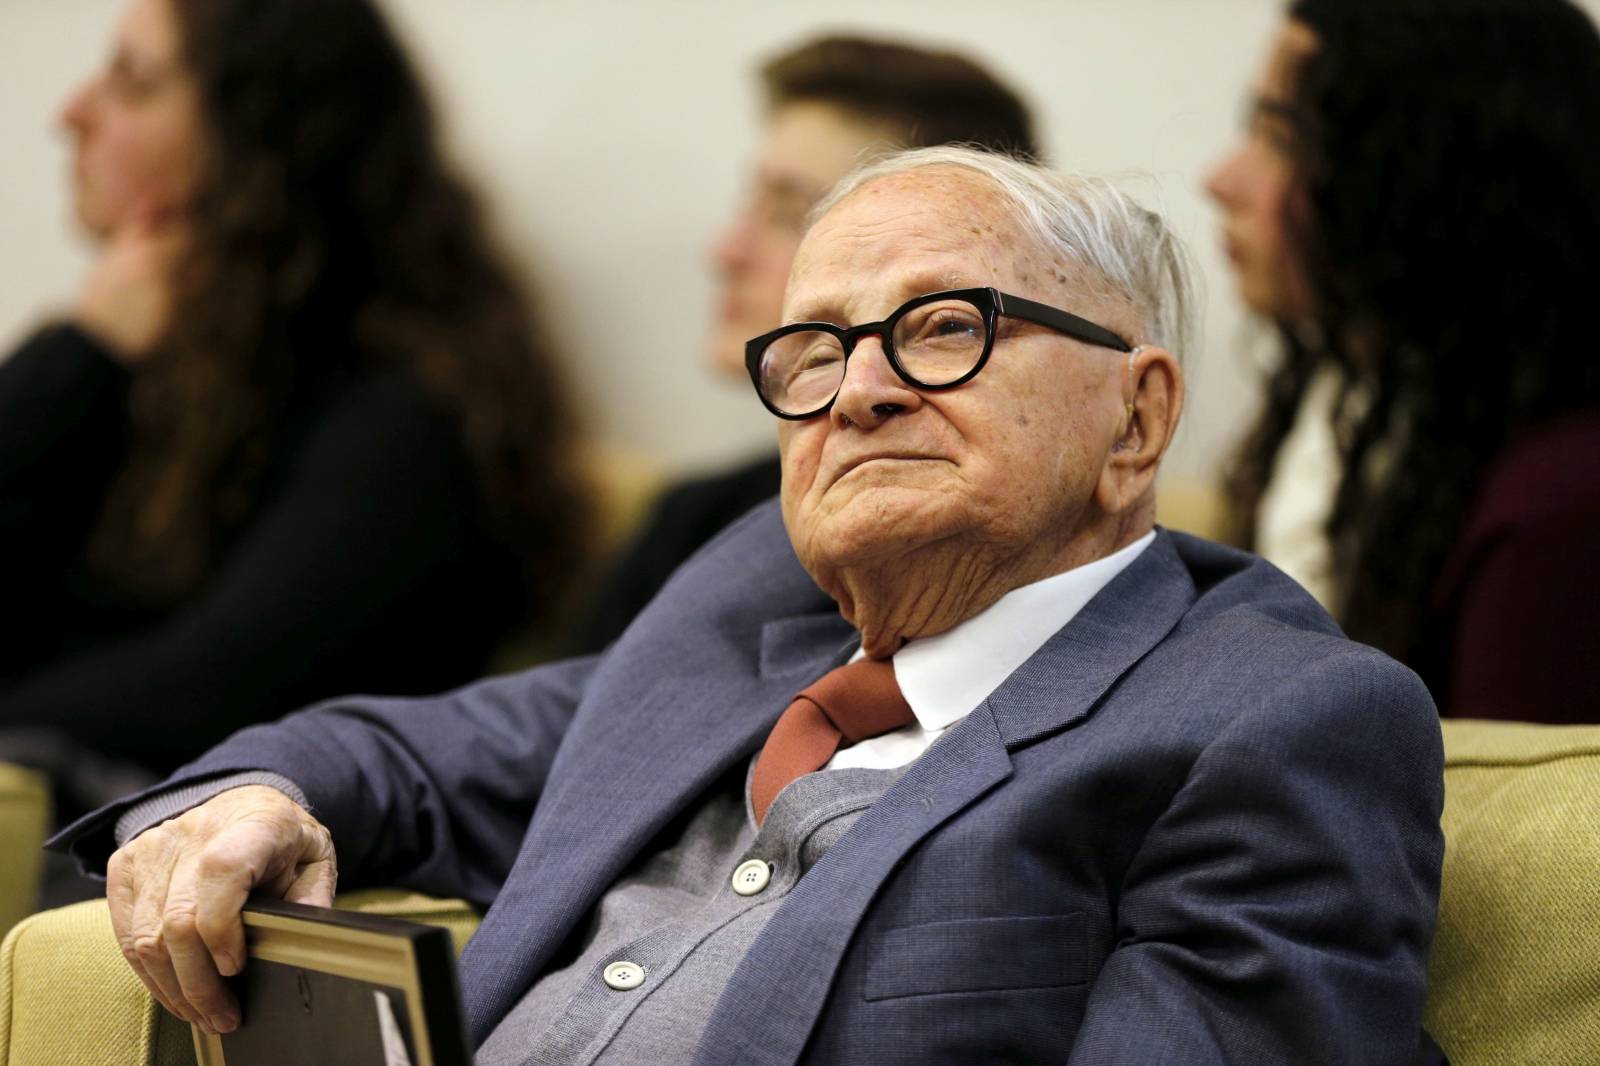 FILE PHOTO: Eitan, who was involved in the capture of Eichmann, an architect of the Nazi Holocaust, sits during a ceremony at Israeli President Rivlin's residence in Jerusalem